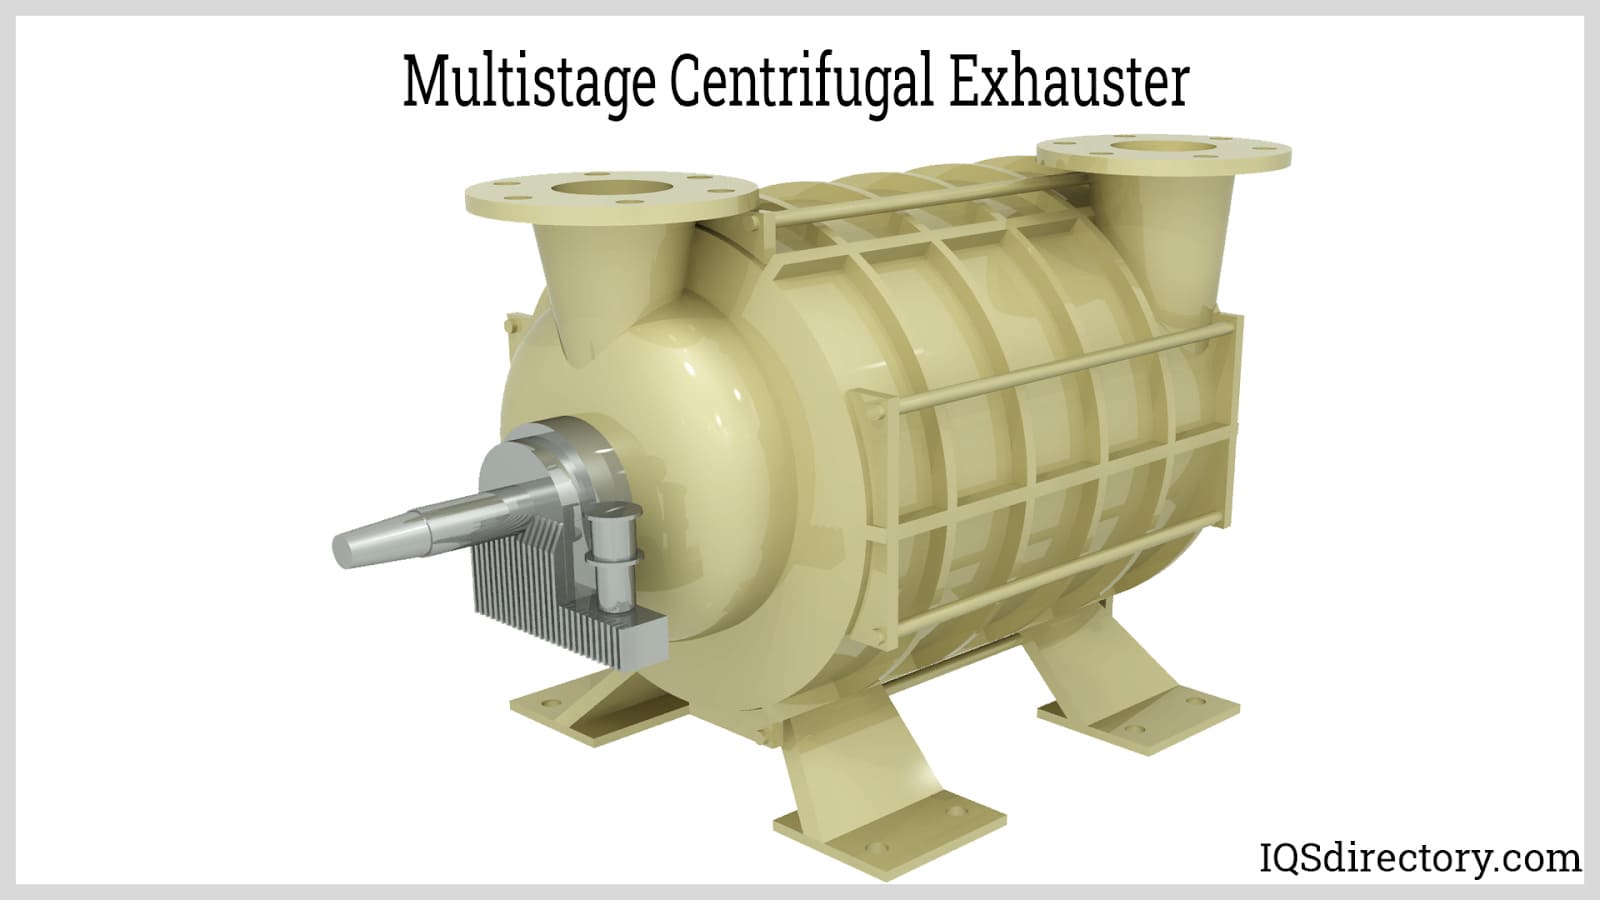 Multistage Centrifugal Exhauster